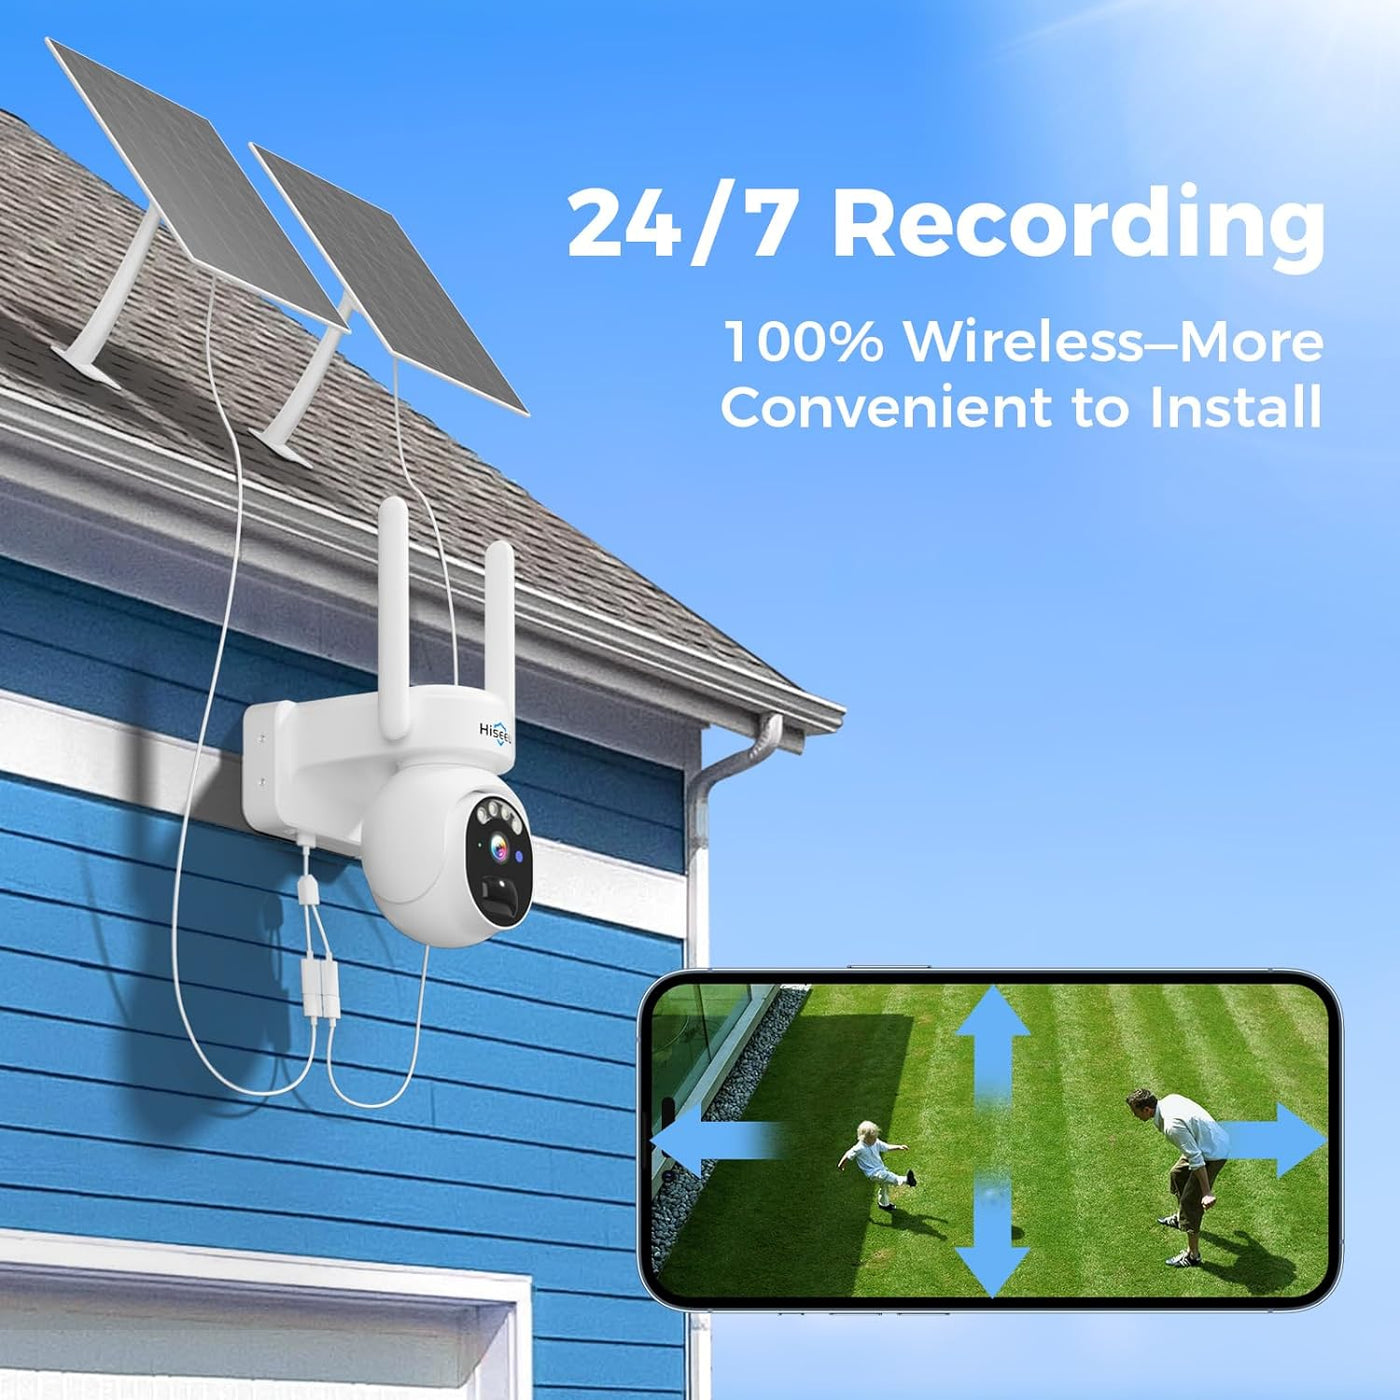 Hiseeu 24/7 Recording Solar Camera Outdoor, 4MP Wireless Home Security Camera, PTZ 360° View, PIR Motion Detection, Color Night Vision, IP66, 2-Way Audio, 2.4G WiFi, No Monthly Fee